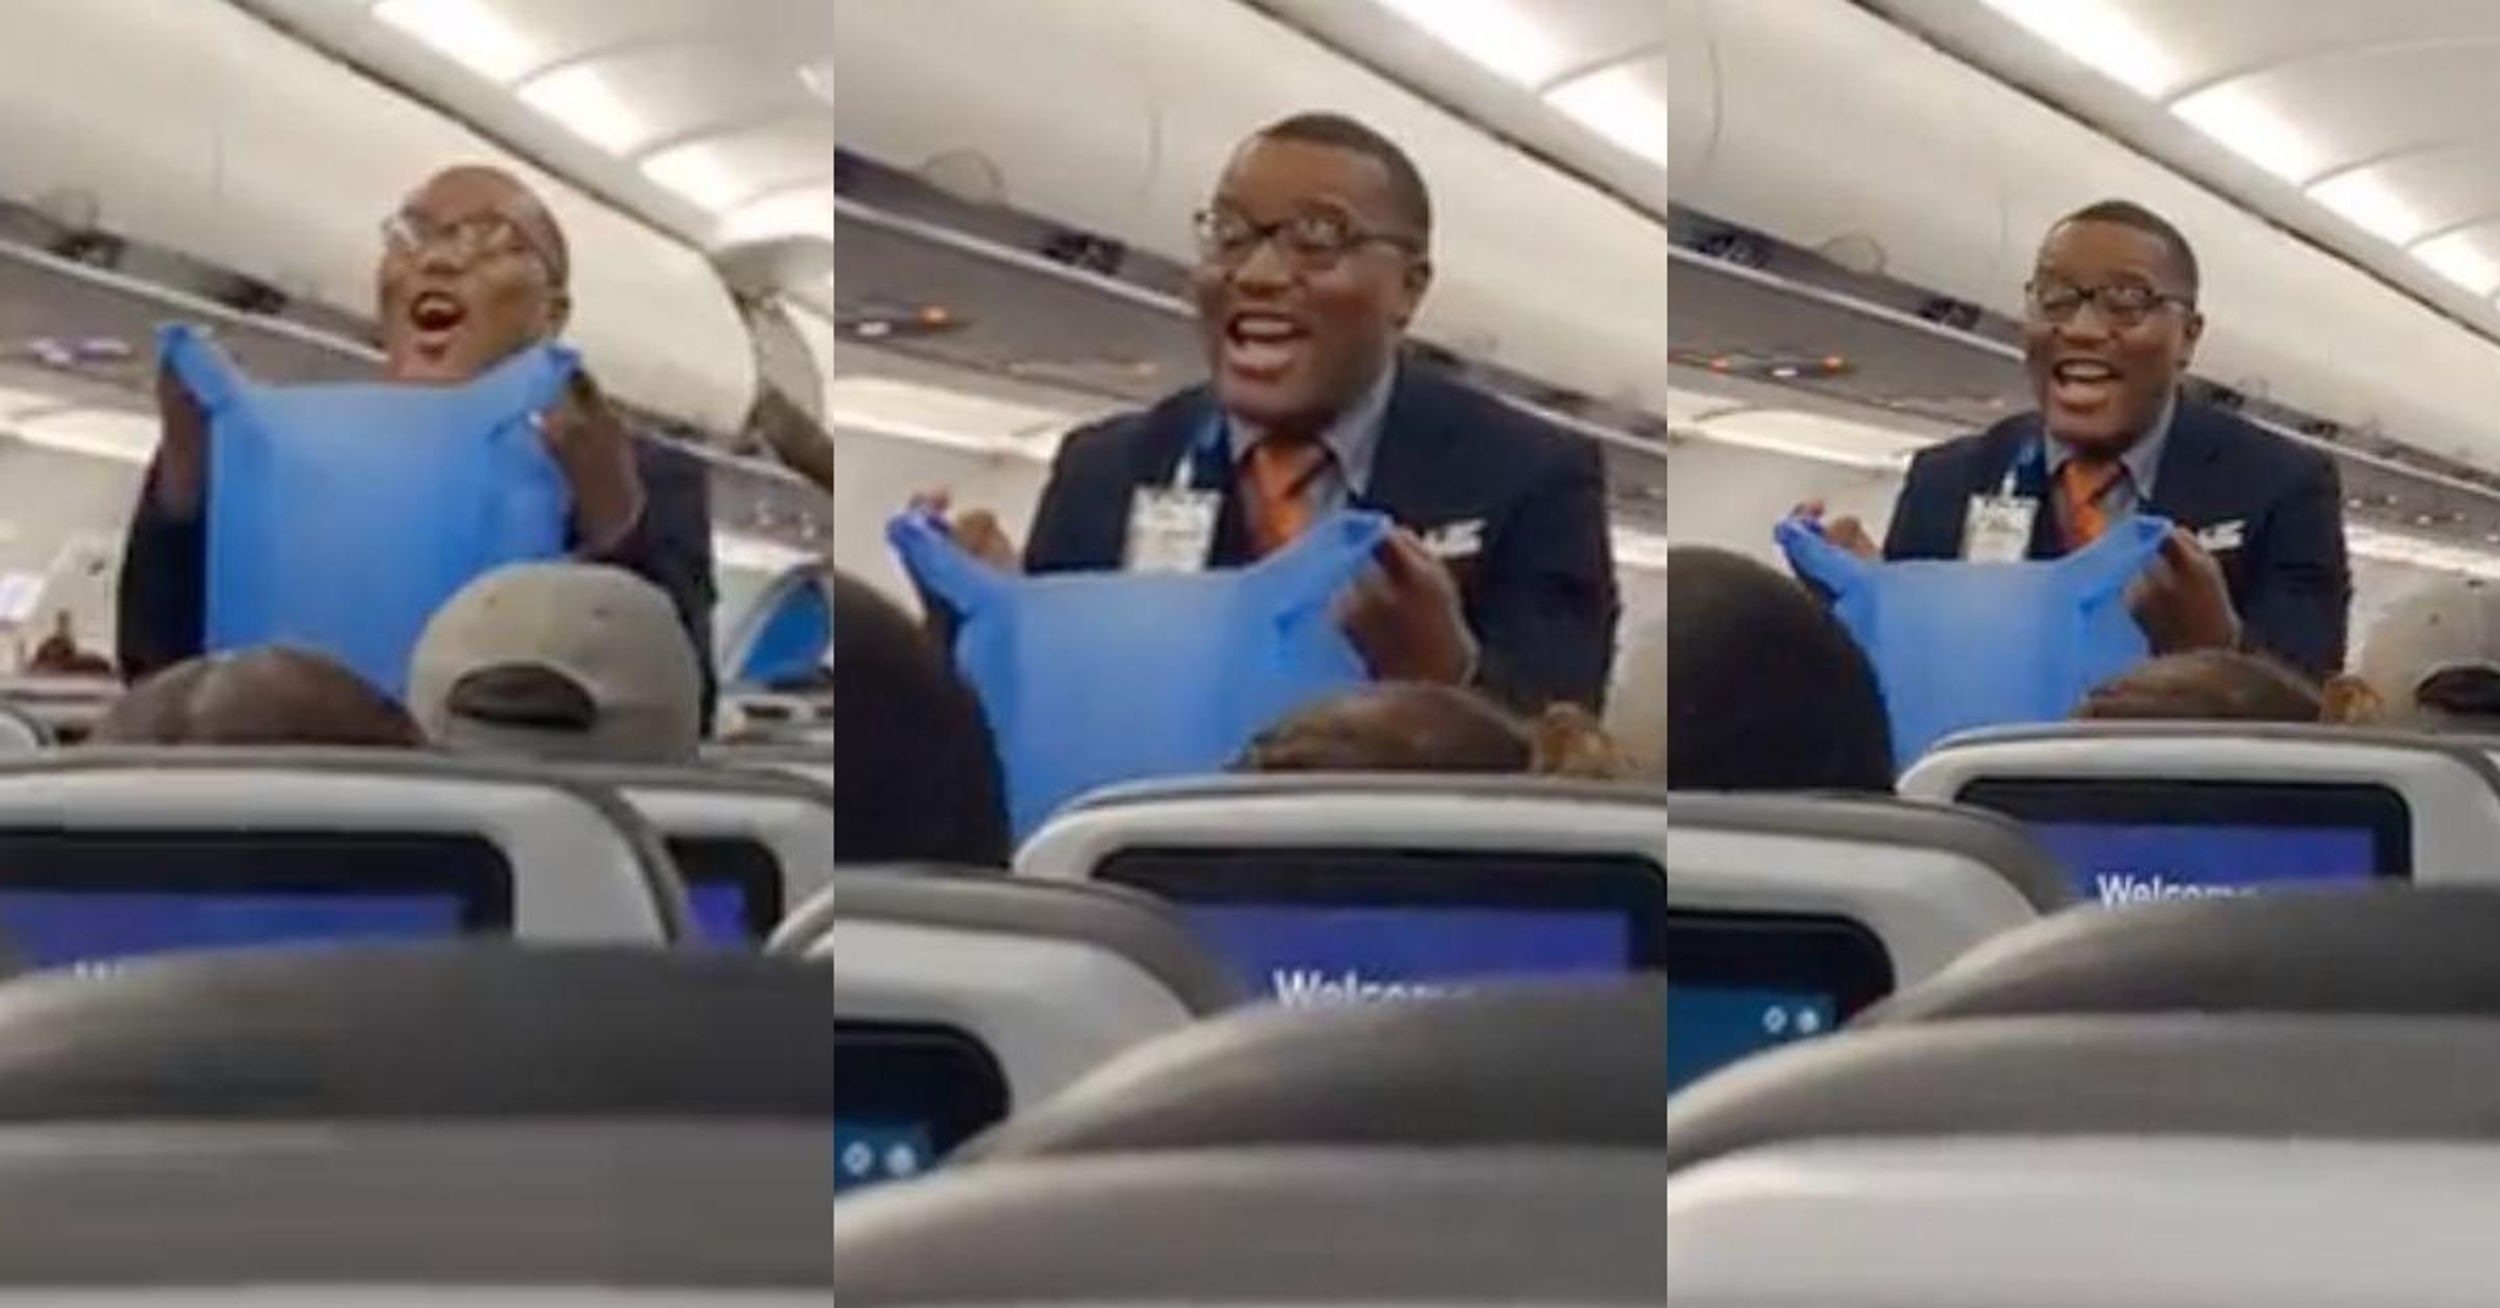 Passengers Cheer As Flight Attendant Sings 'Throw Away Your Mask' In Polarizing Viral Video